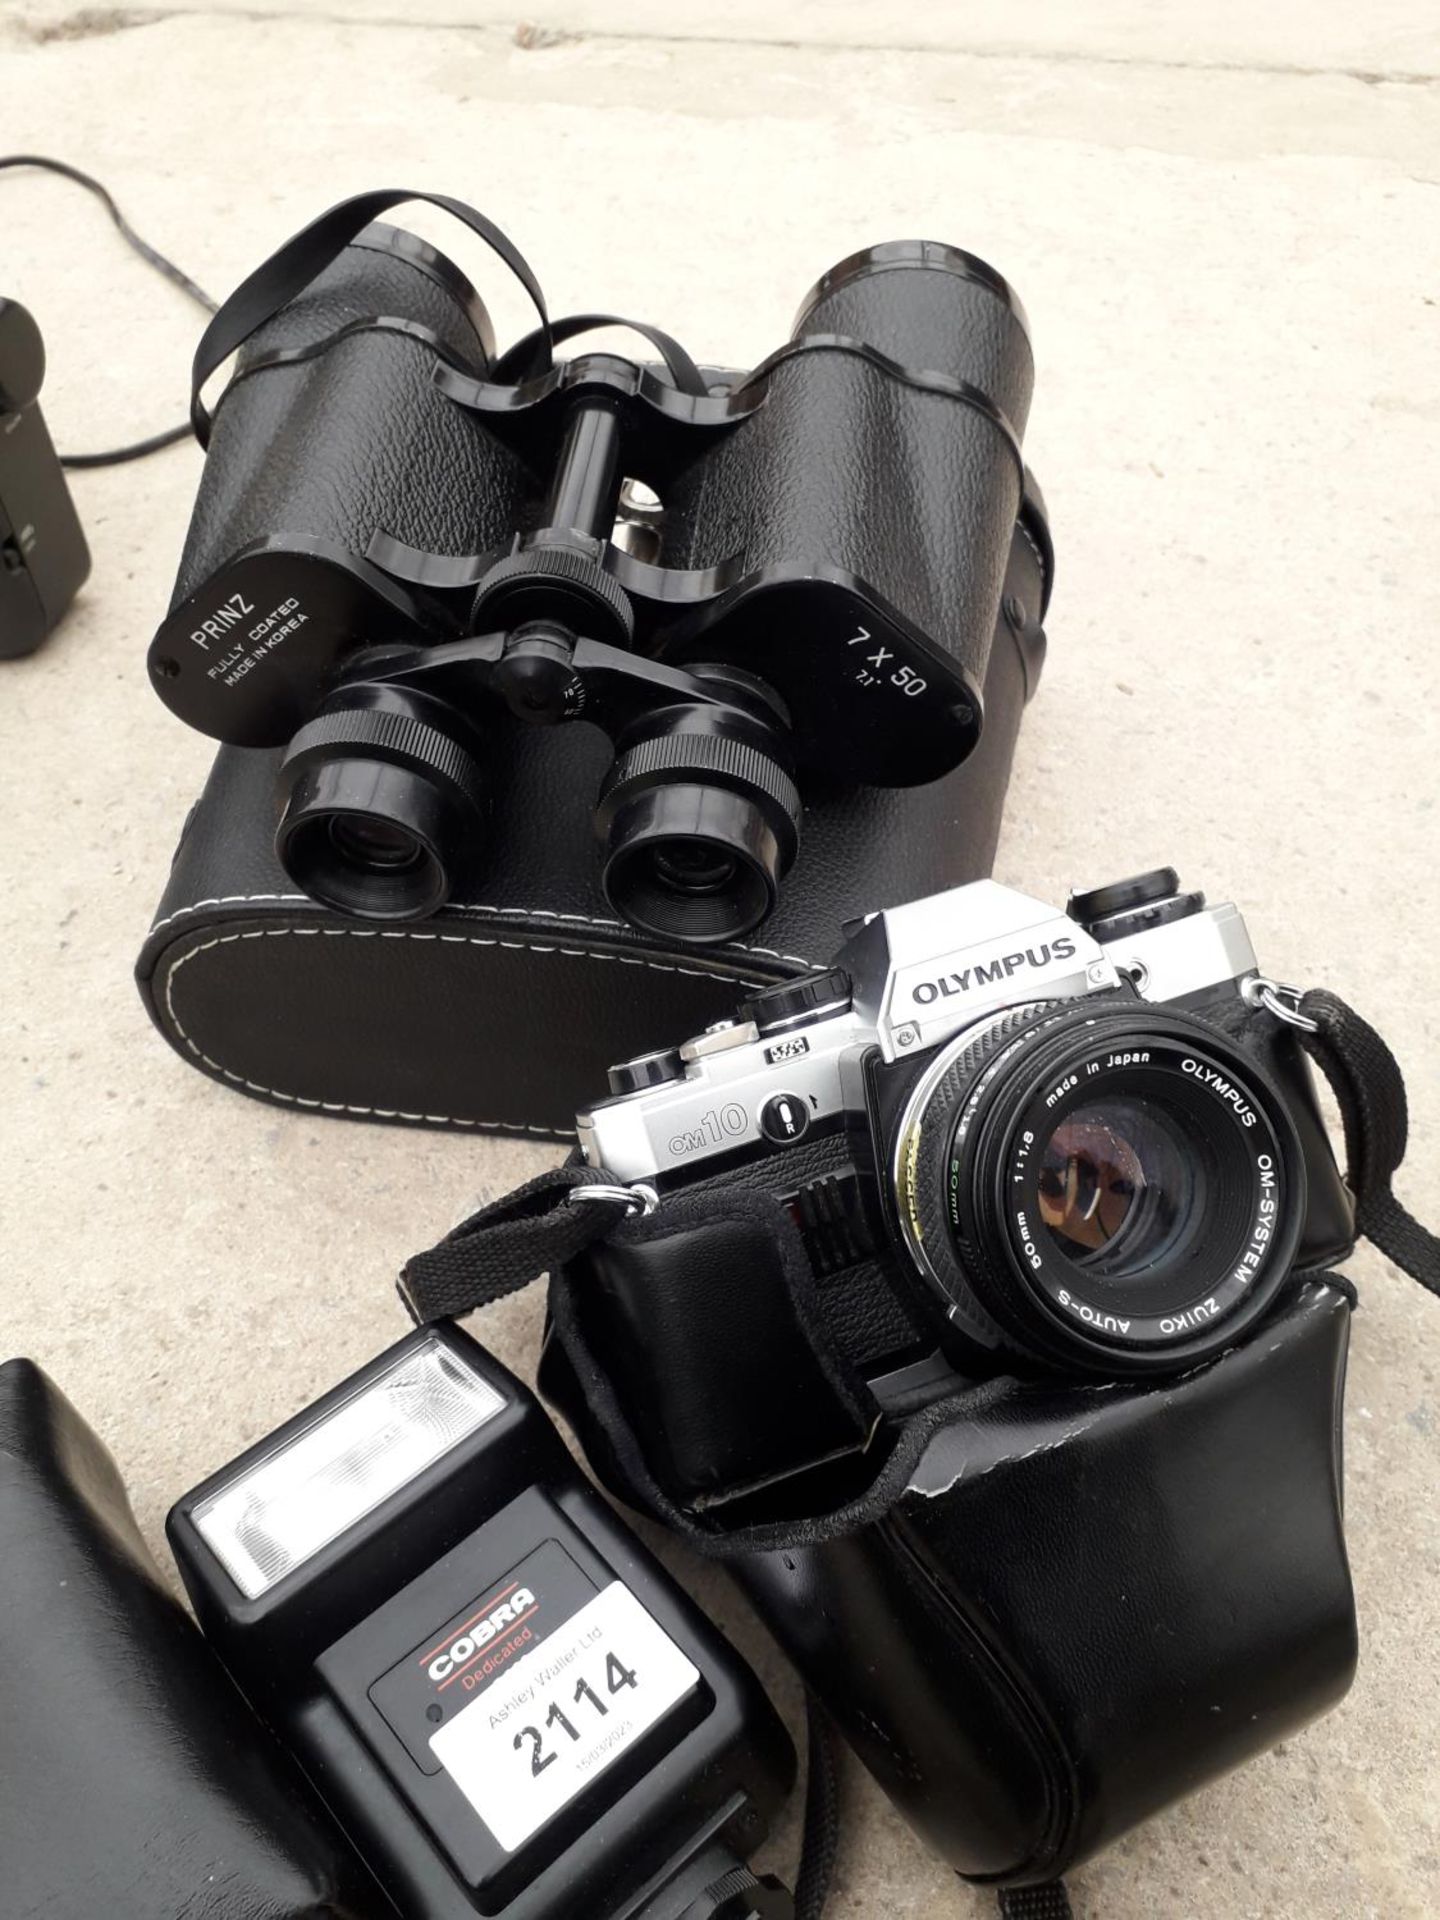 A PAIR OF BINOCULARS, AN OLYMPUS CAMERA AND A CAMERA LENS ETC - Image 2 of 2